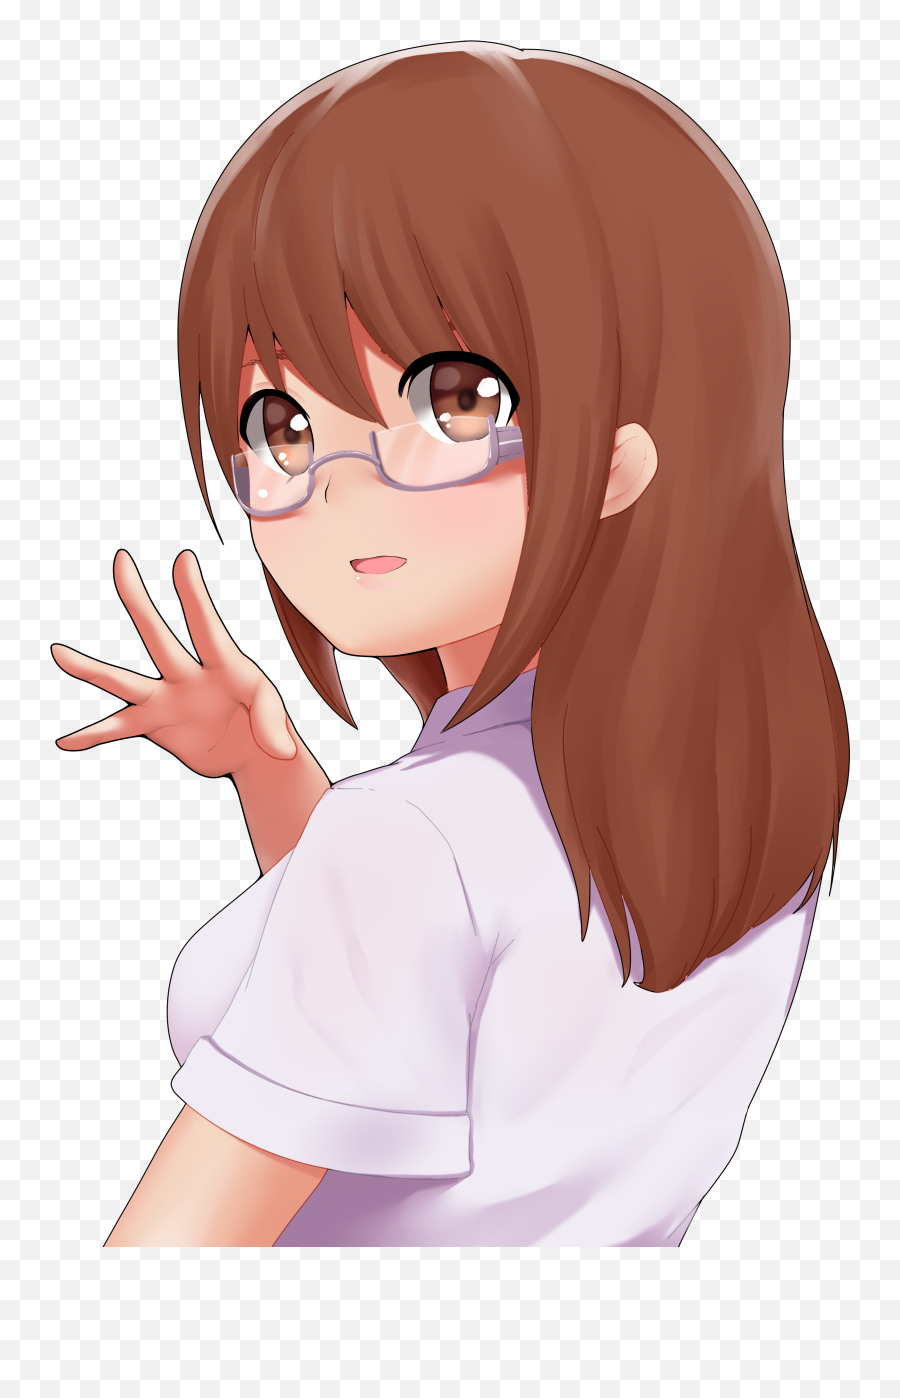 Download Anime Girl Png Image For Free - Anime Girl Png Transparent,Anime Png Images